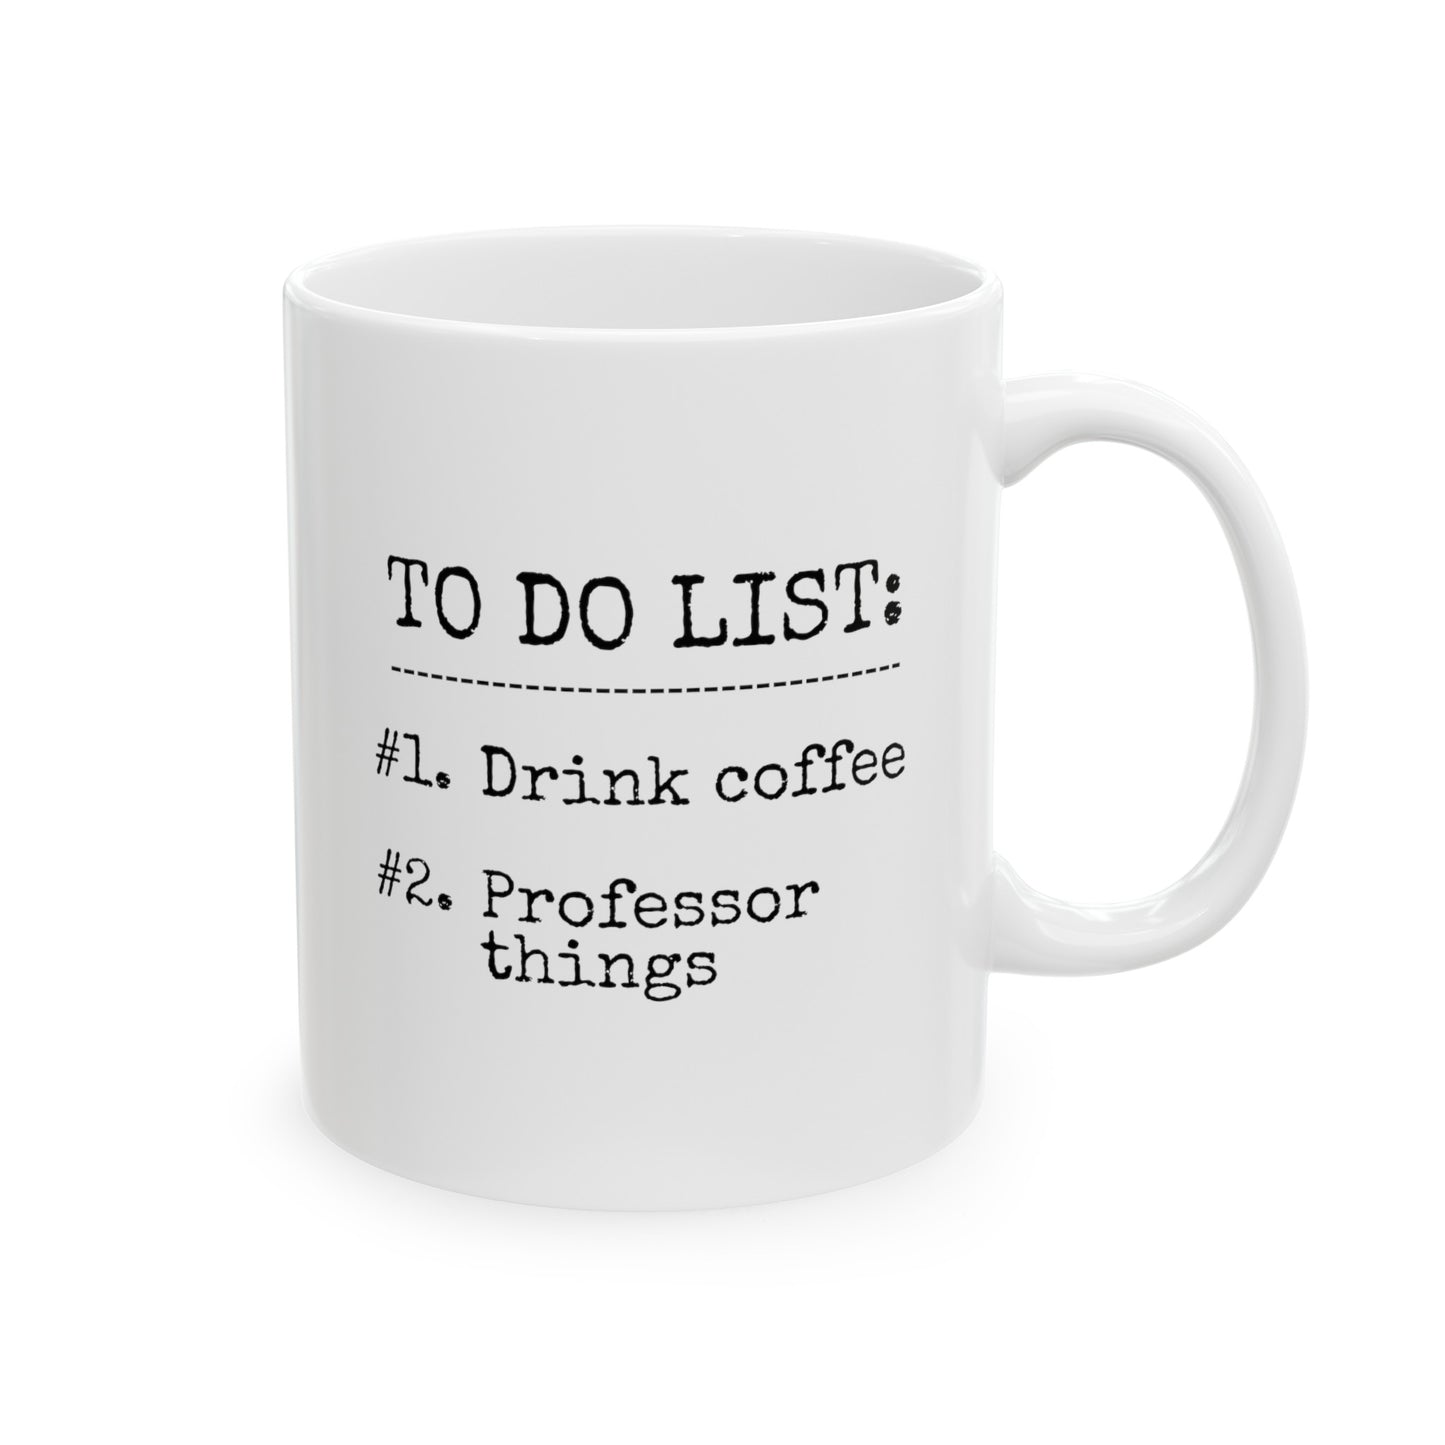 To Do List Drink Coffee Professor Things 11oz white funny large coffee mug gift for best college teacher instructor educator waveywares wavey wares wavywares wavy wares